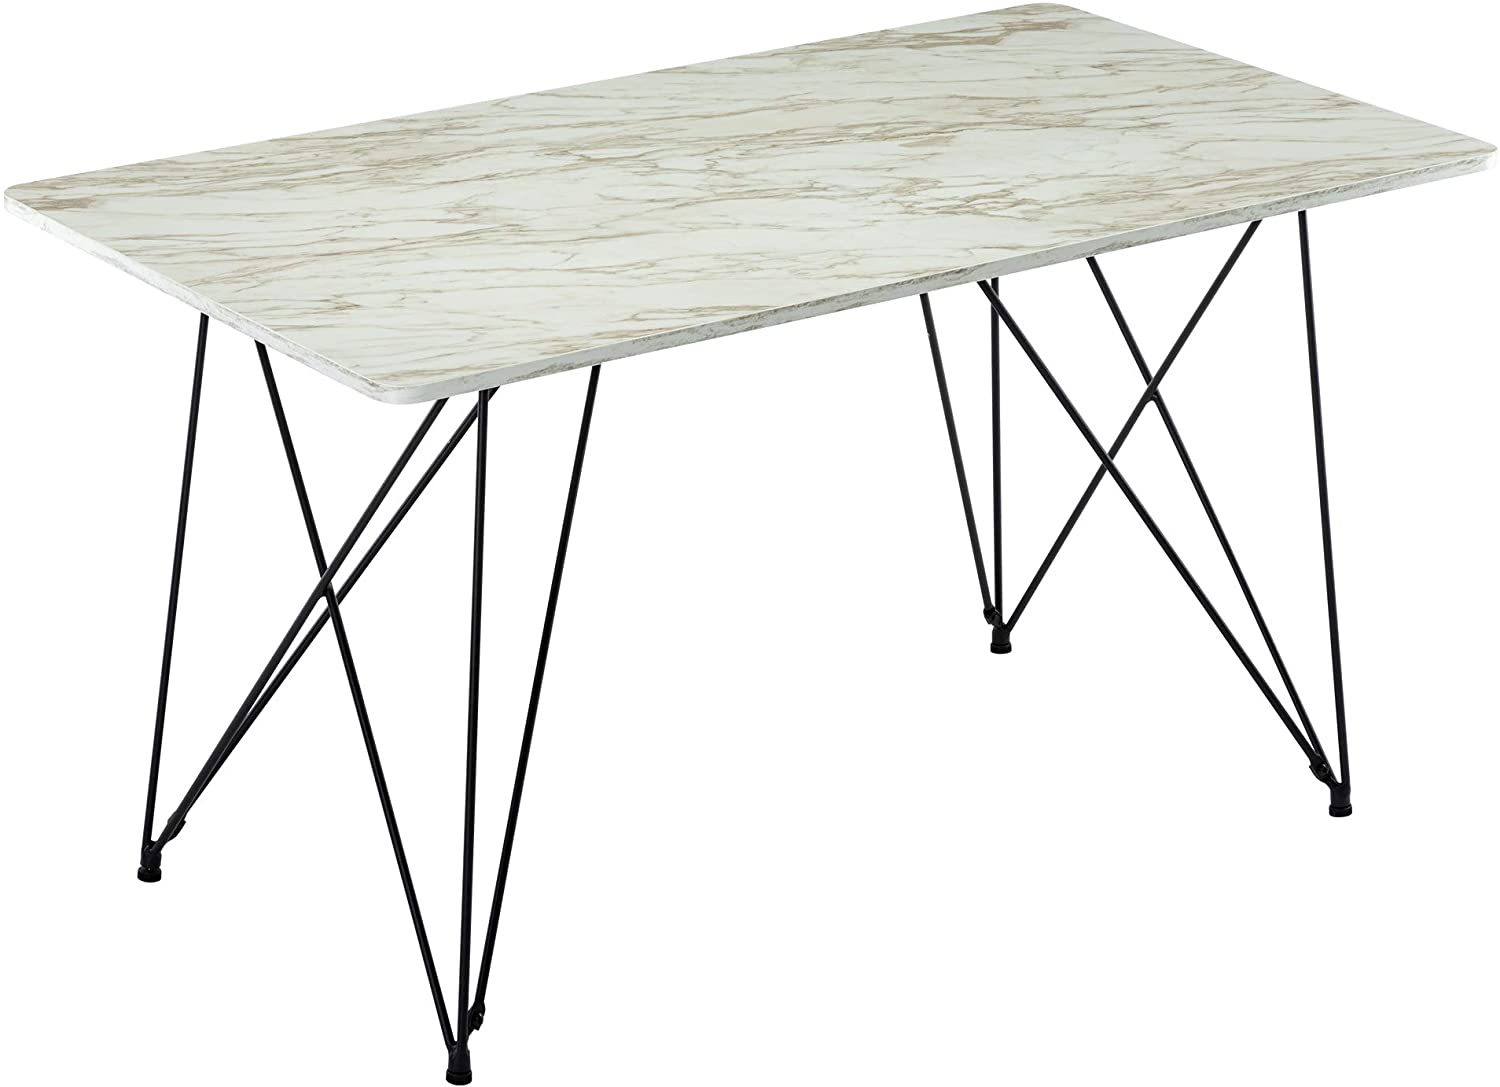 B08KPW8YL8 DAGONHIL Modern Wood and Metal Pedestal Rectangle Dining Table, 53" L(White Marble)